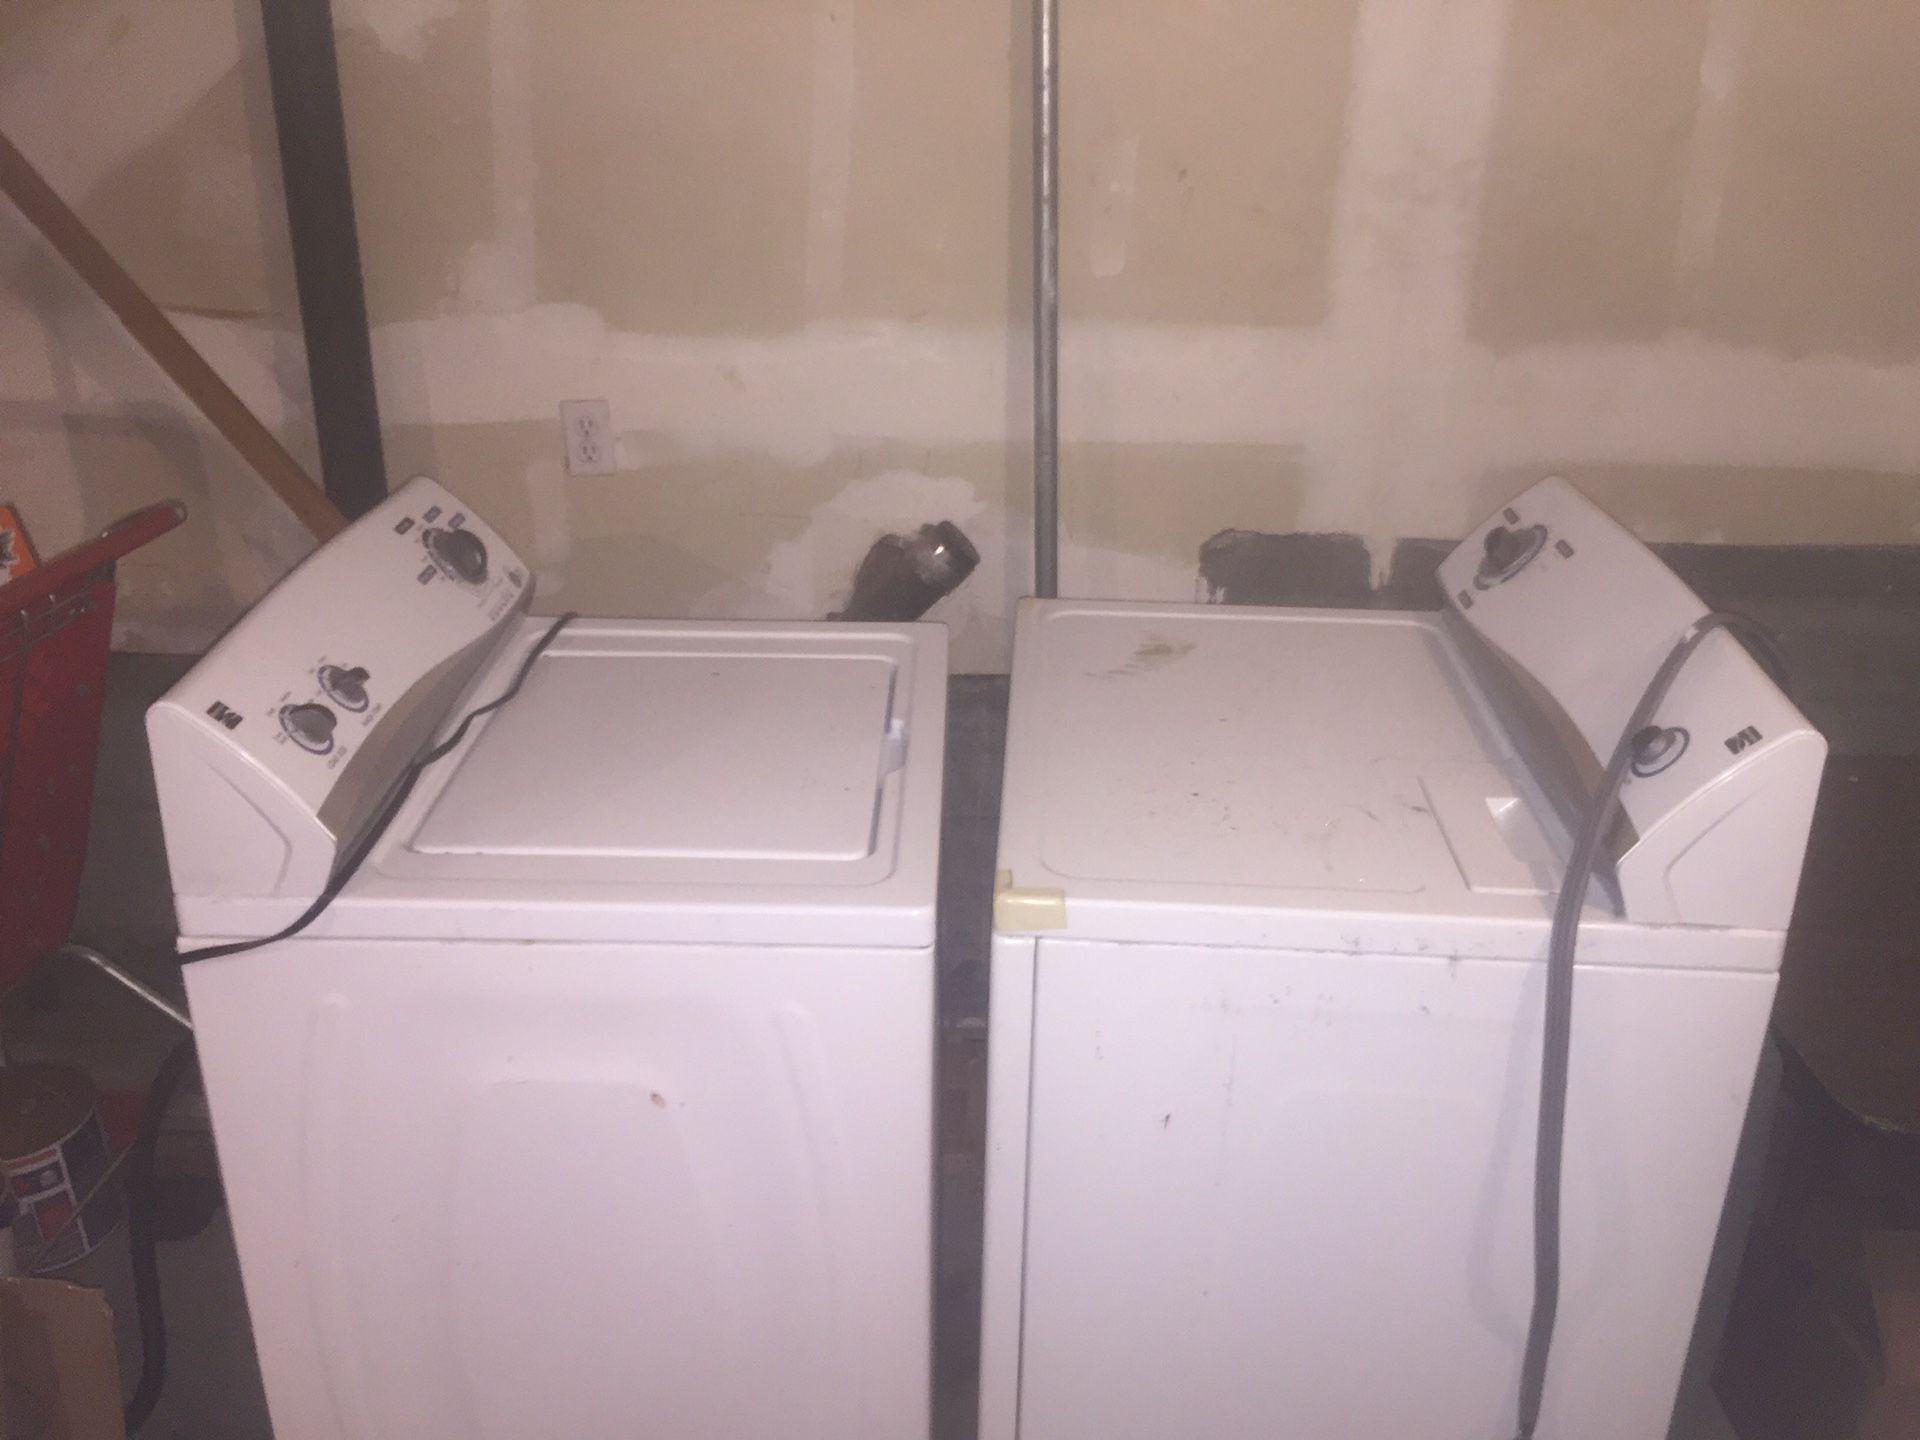 New Kenmore Washer and Dryer Set both in excellent working condition $200 for both $100 for Gorgeous Leather Sofa